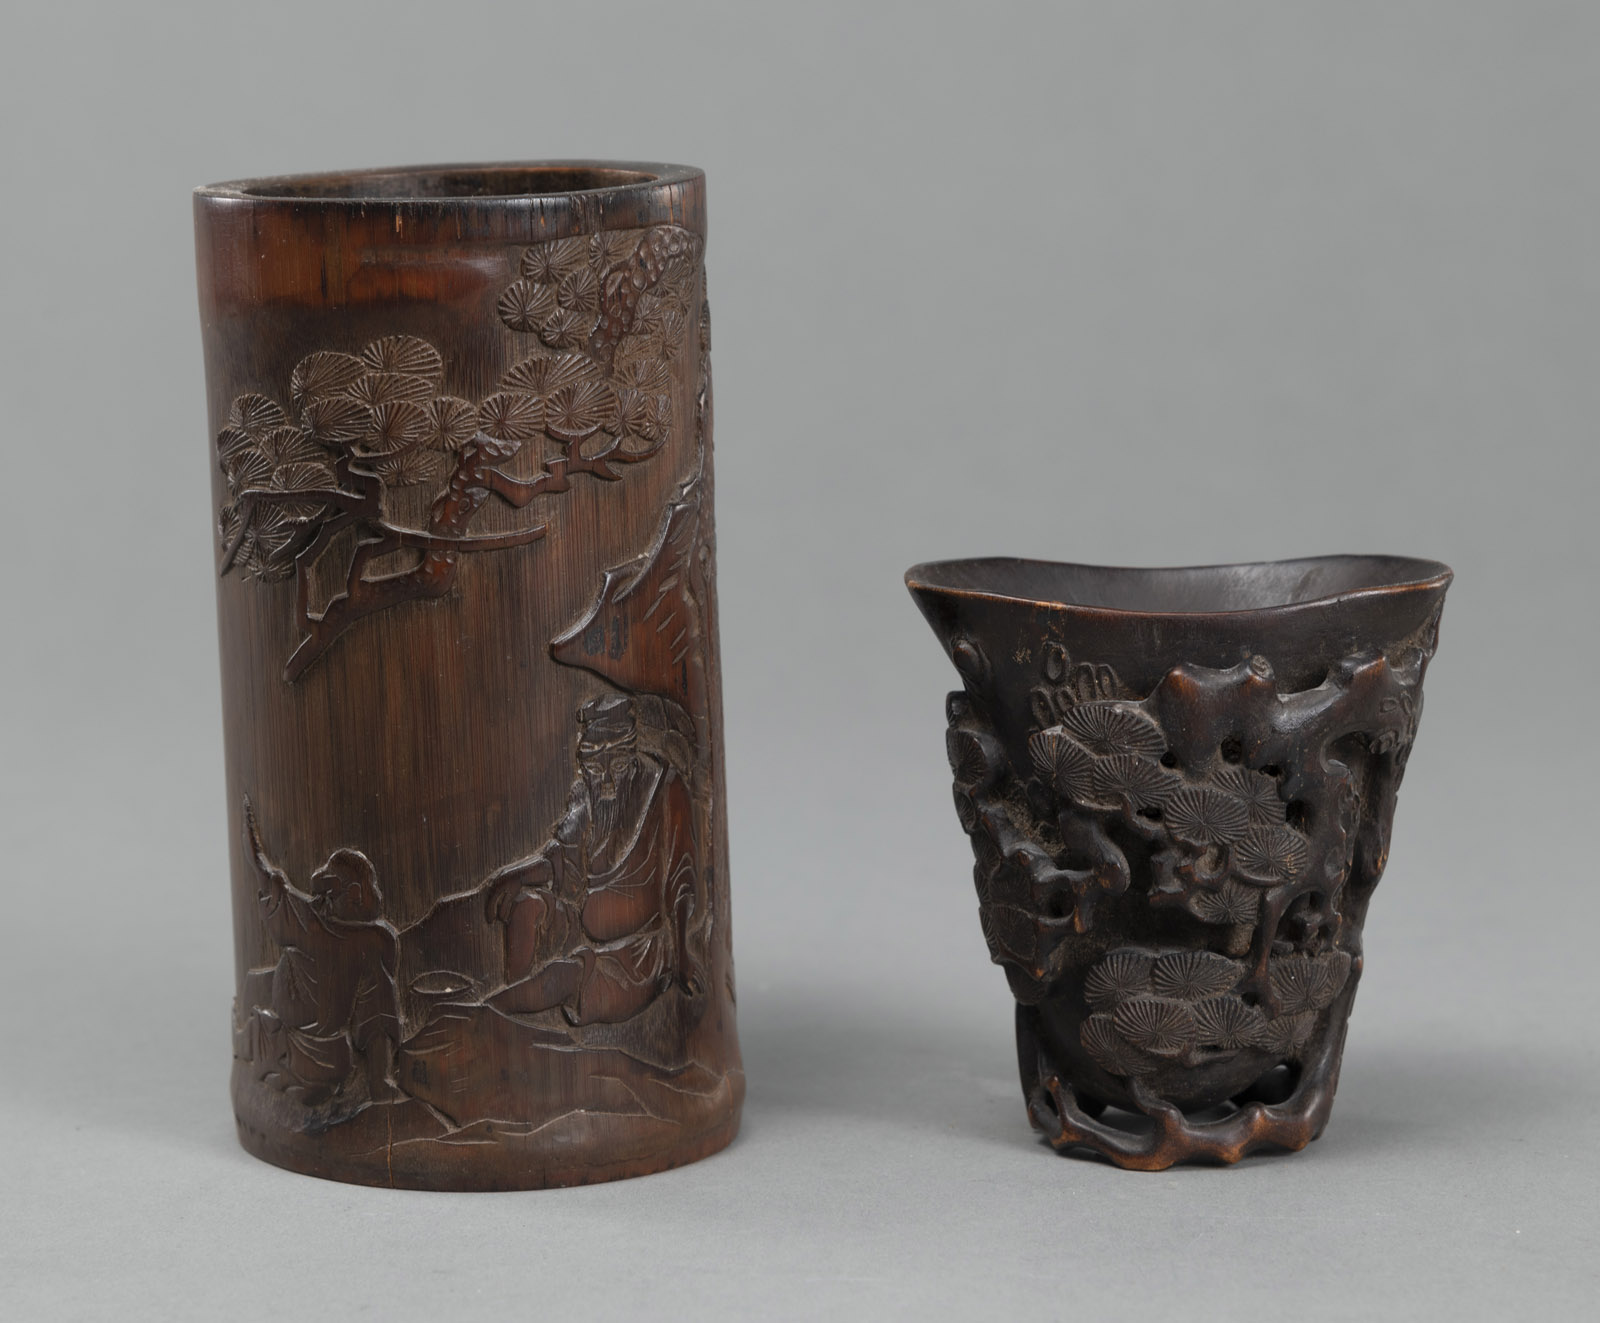 <b>A BAMBOO BRUSHPOT AND A WOOD LIBATION CUP</b>